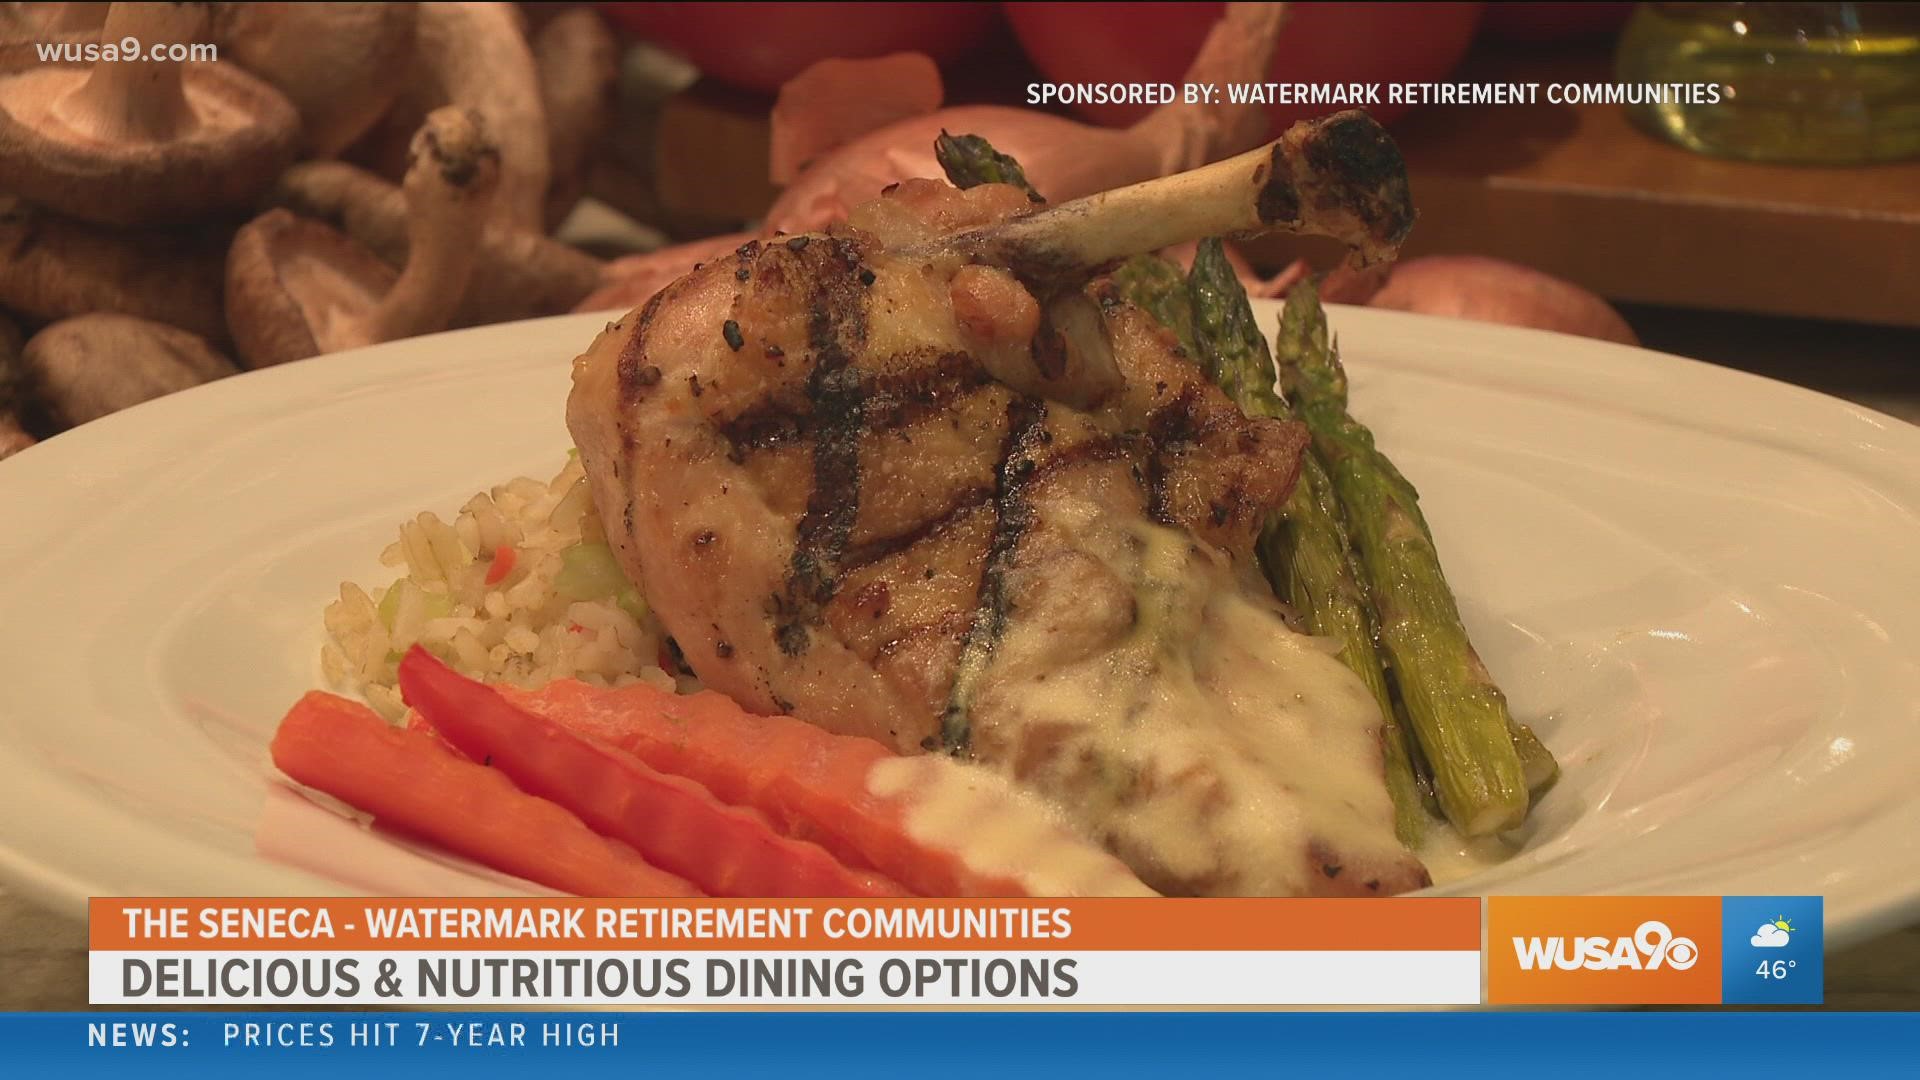 Sponsored by: Watermark Retirement Communities. We get a look at the nutritious and delicious dining options at The Seneca in Rockville.